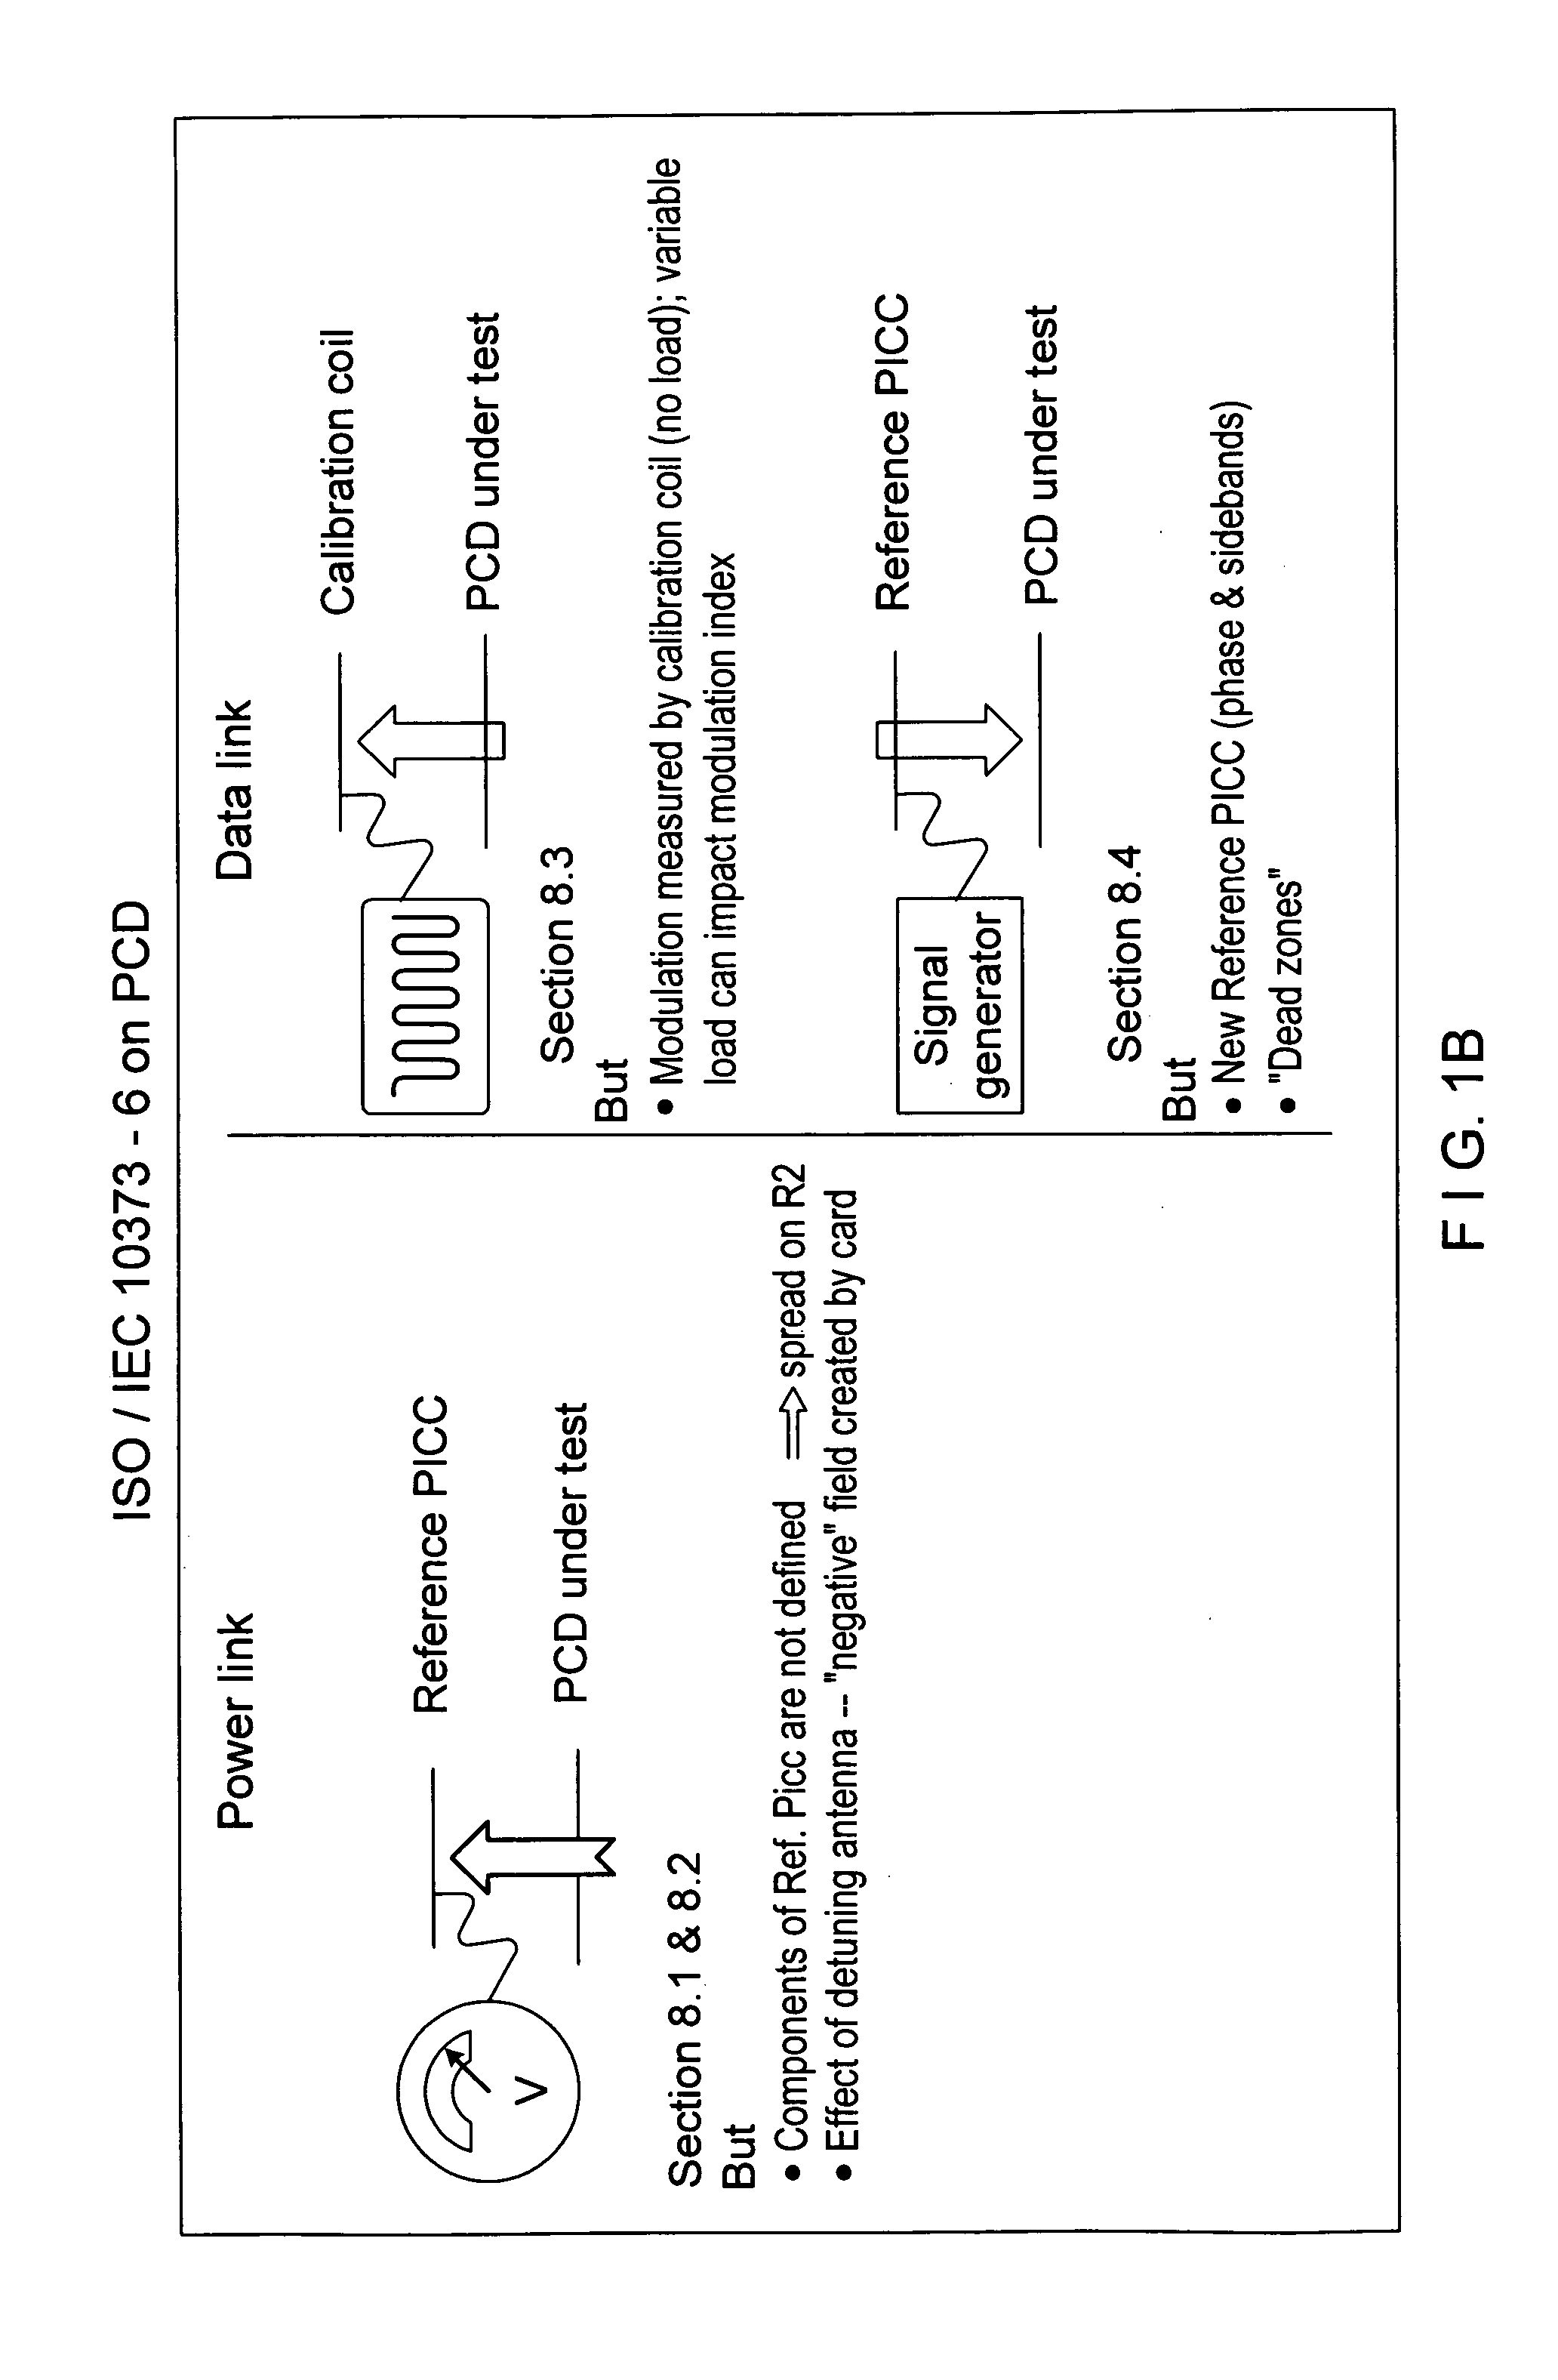 Method and system for conducting contactless payment card transactions